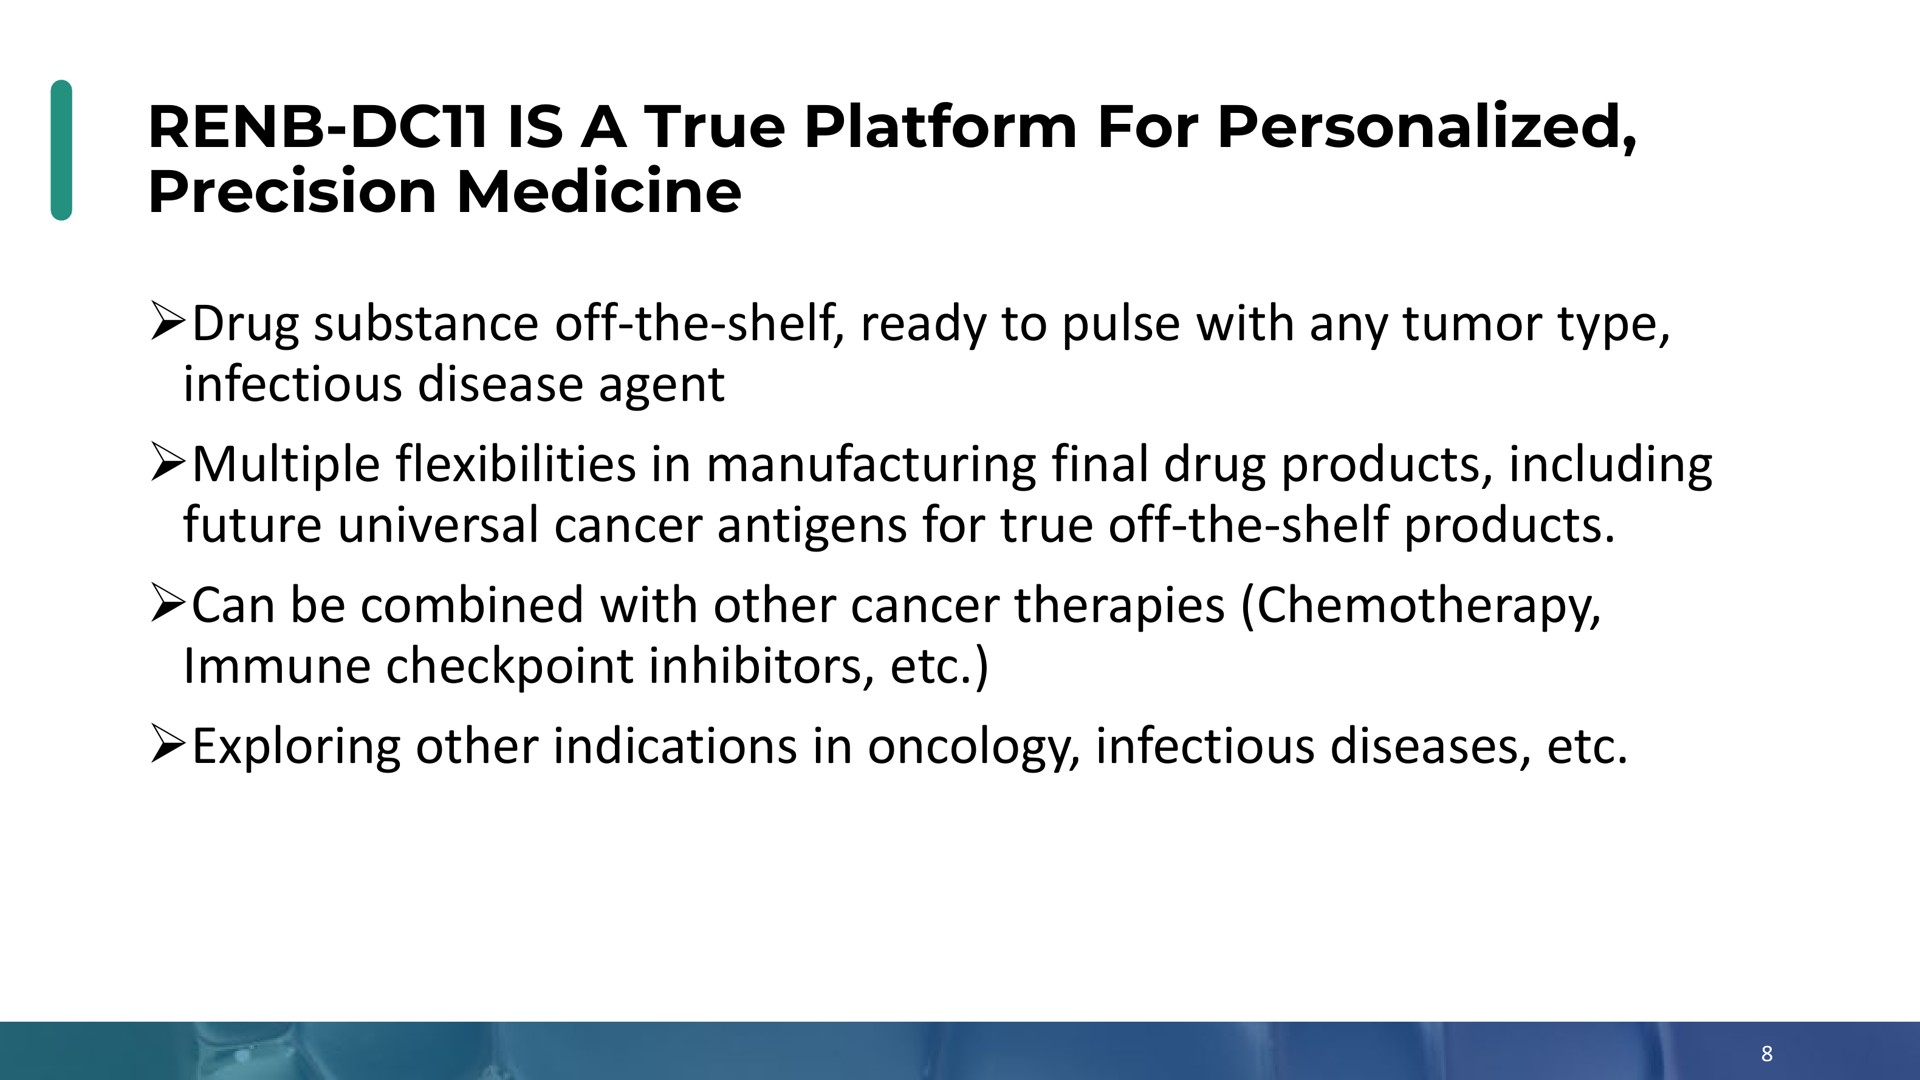 is a true platform for personalized precision medicine drug substance off the shelf ready to pulse with any tumor type infectious disease agent multiple flexibilities in manufacturing final drug products including future universal cancer antigens for true off the shelf products can be combined with other cancer therapies chemotherapy immune inhibitors exploring other indications in oncology infectious diseases | Enochian Biosciences